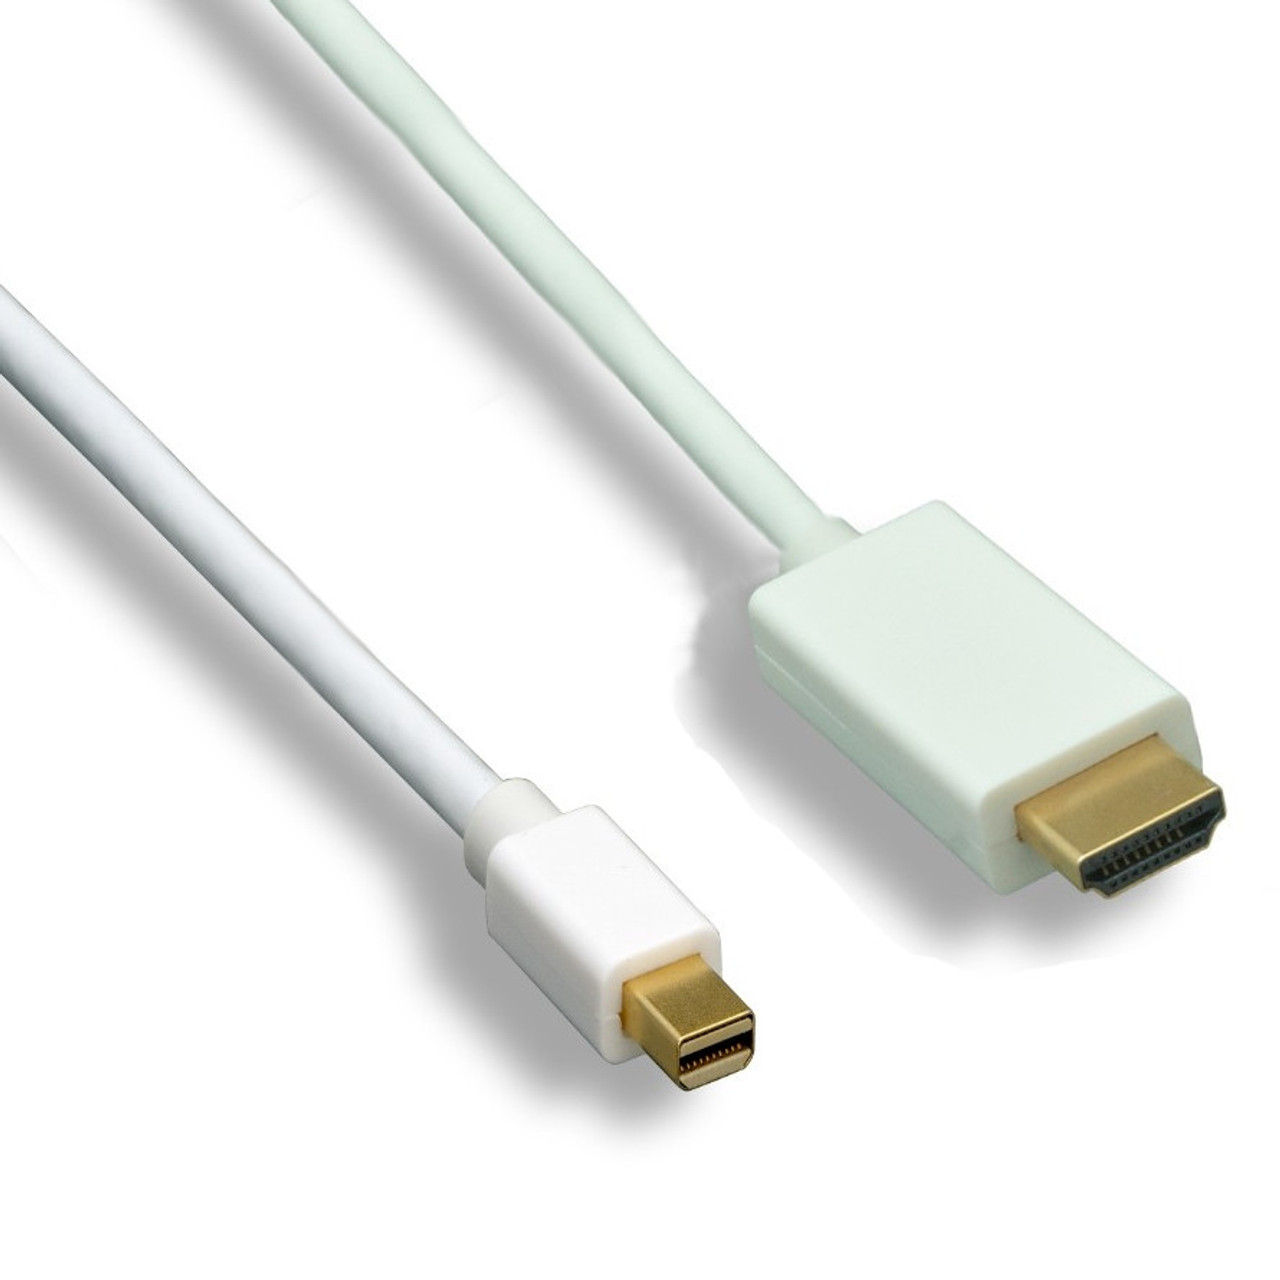 15 Foot Mini DisplayPort to HDMI Cable by Less